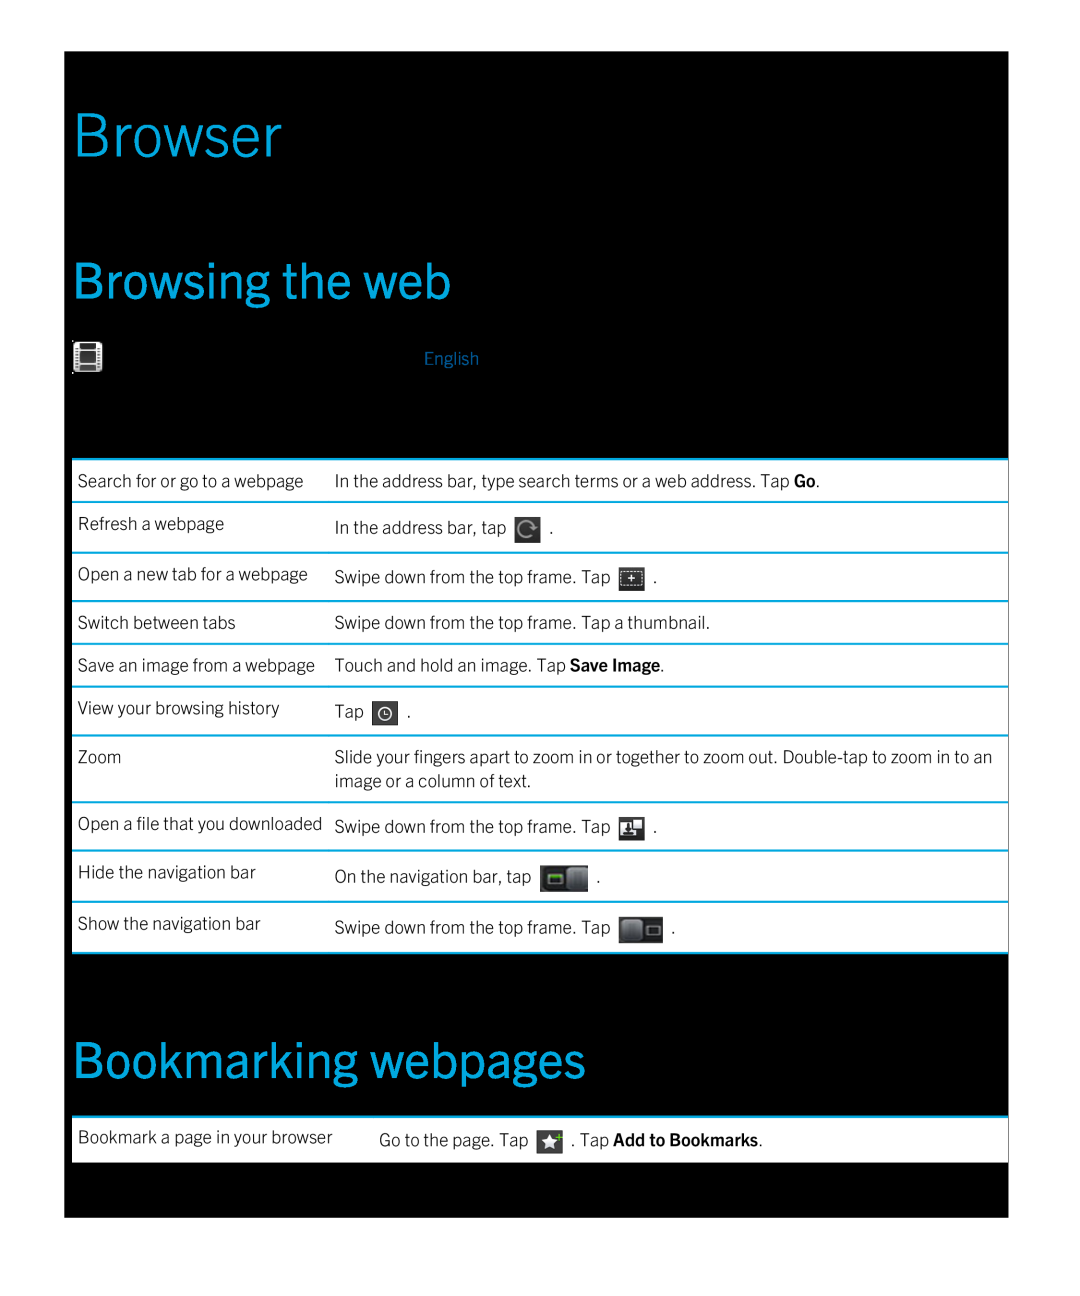 Blackberry 2.0.1 manual Browser, Browsing the web, Bookmarking webpages 